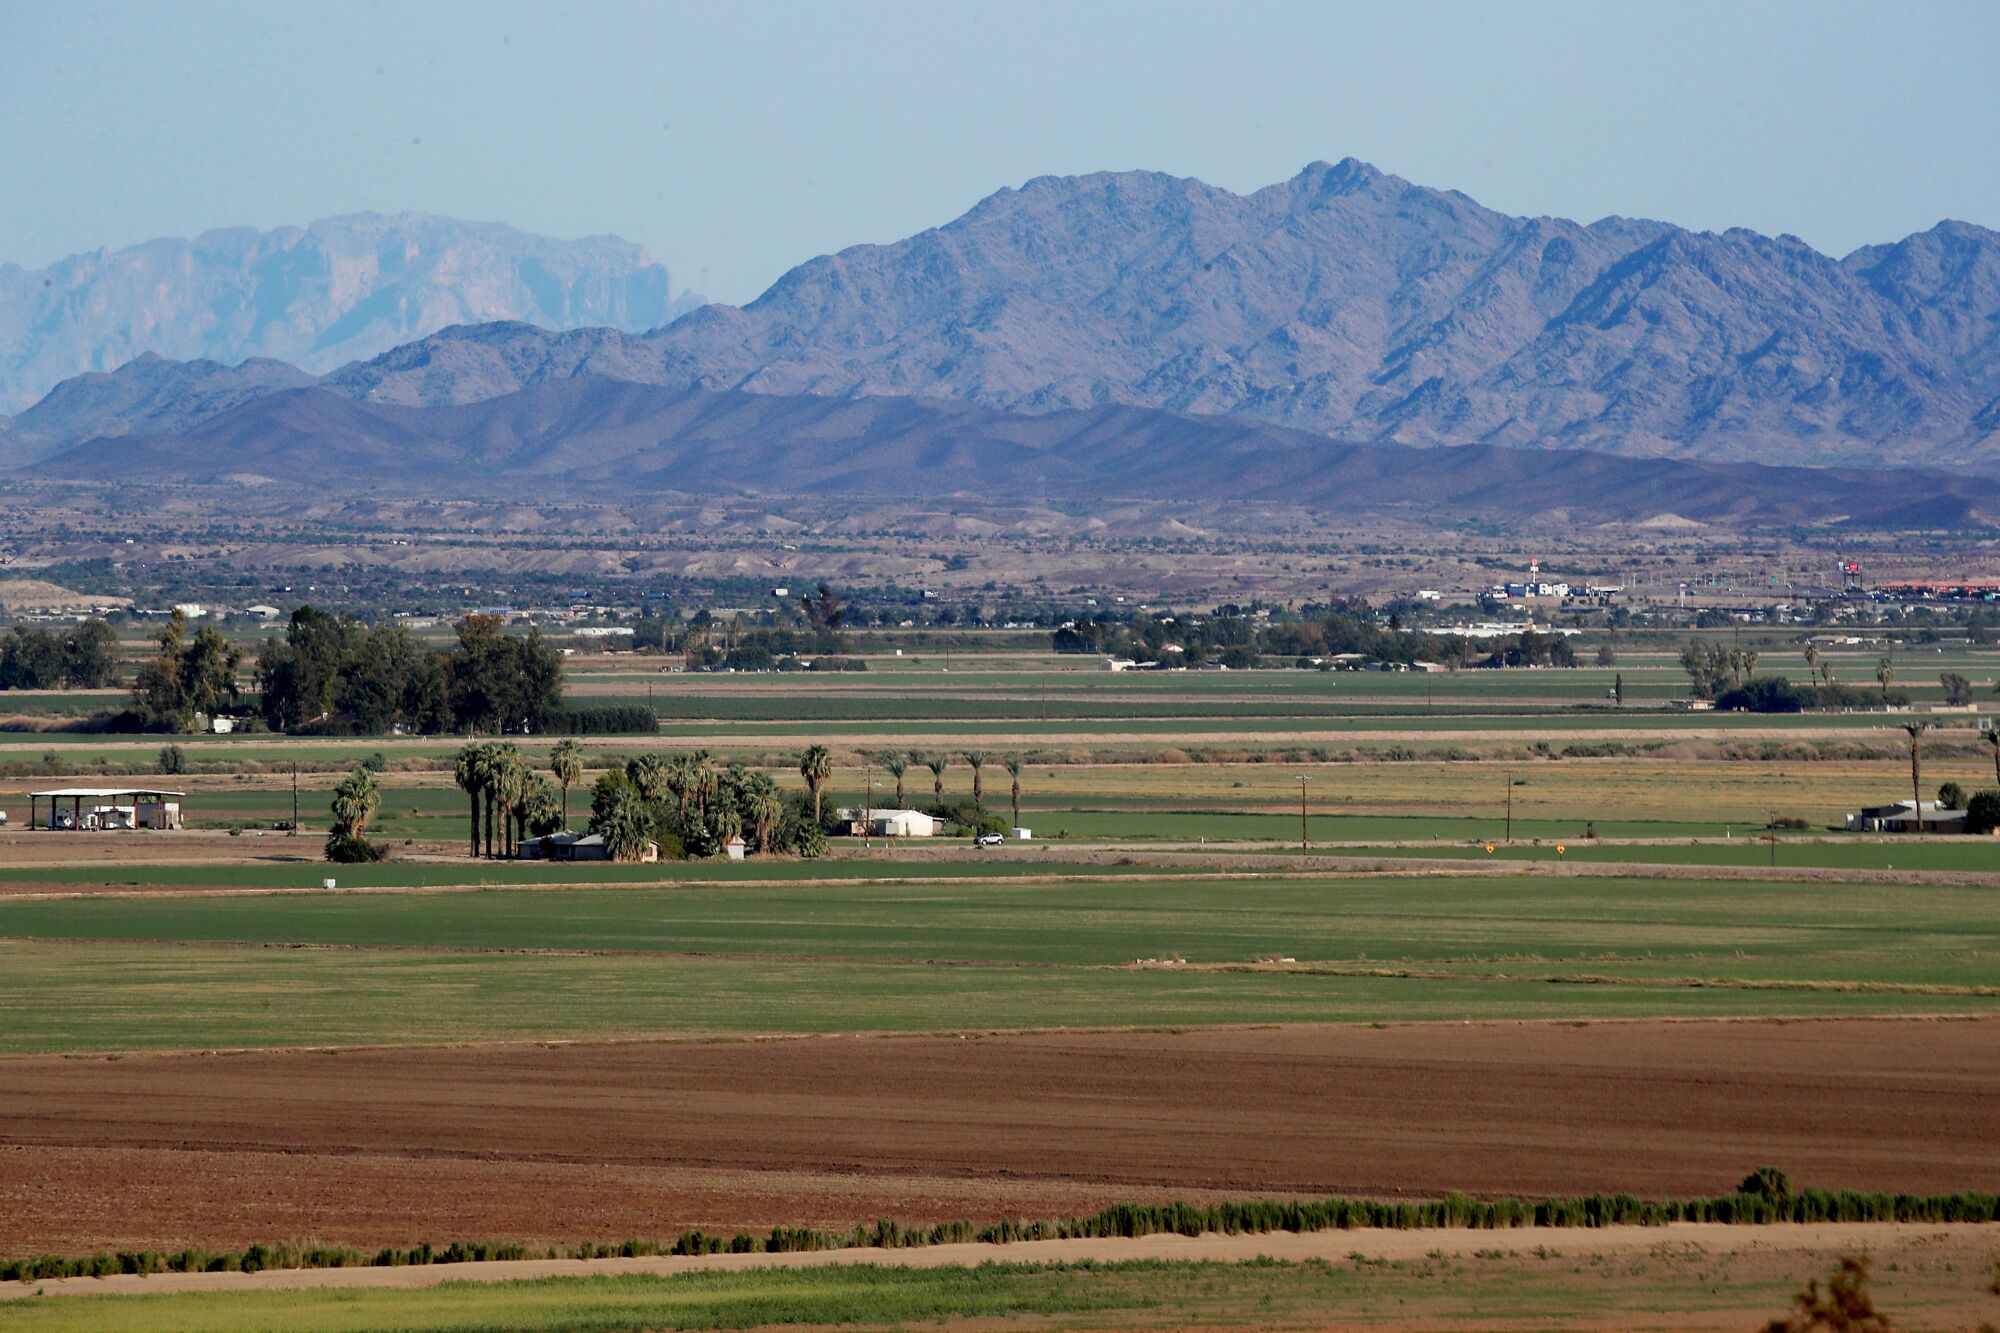 Some Colorado River farmers are paid to leave fields dry - Los Angeles Times